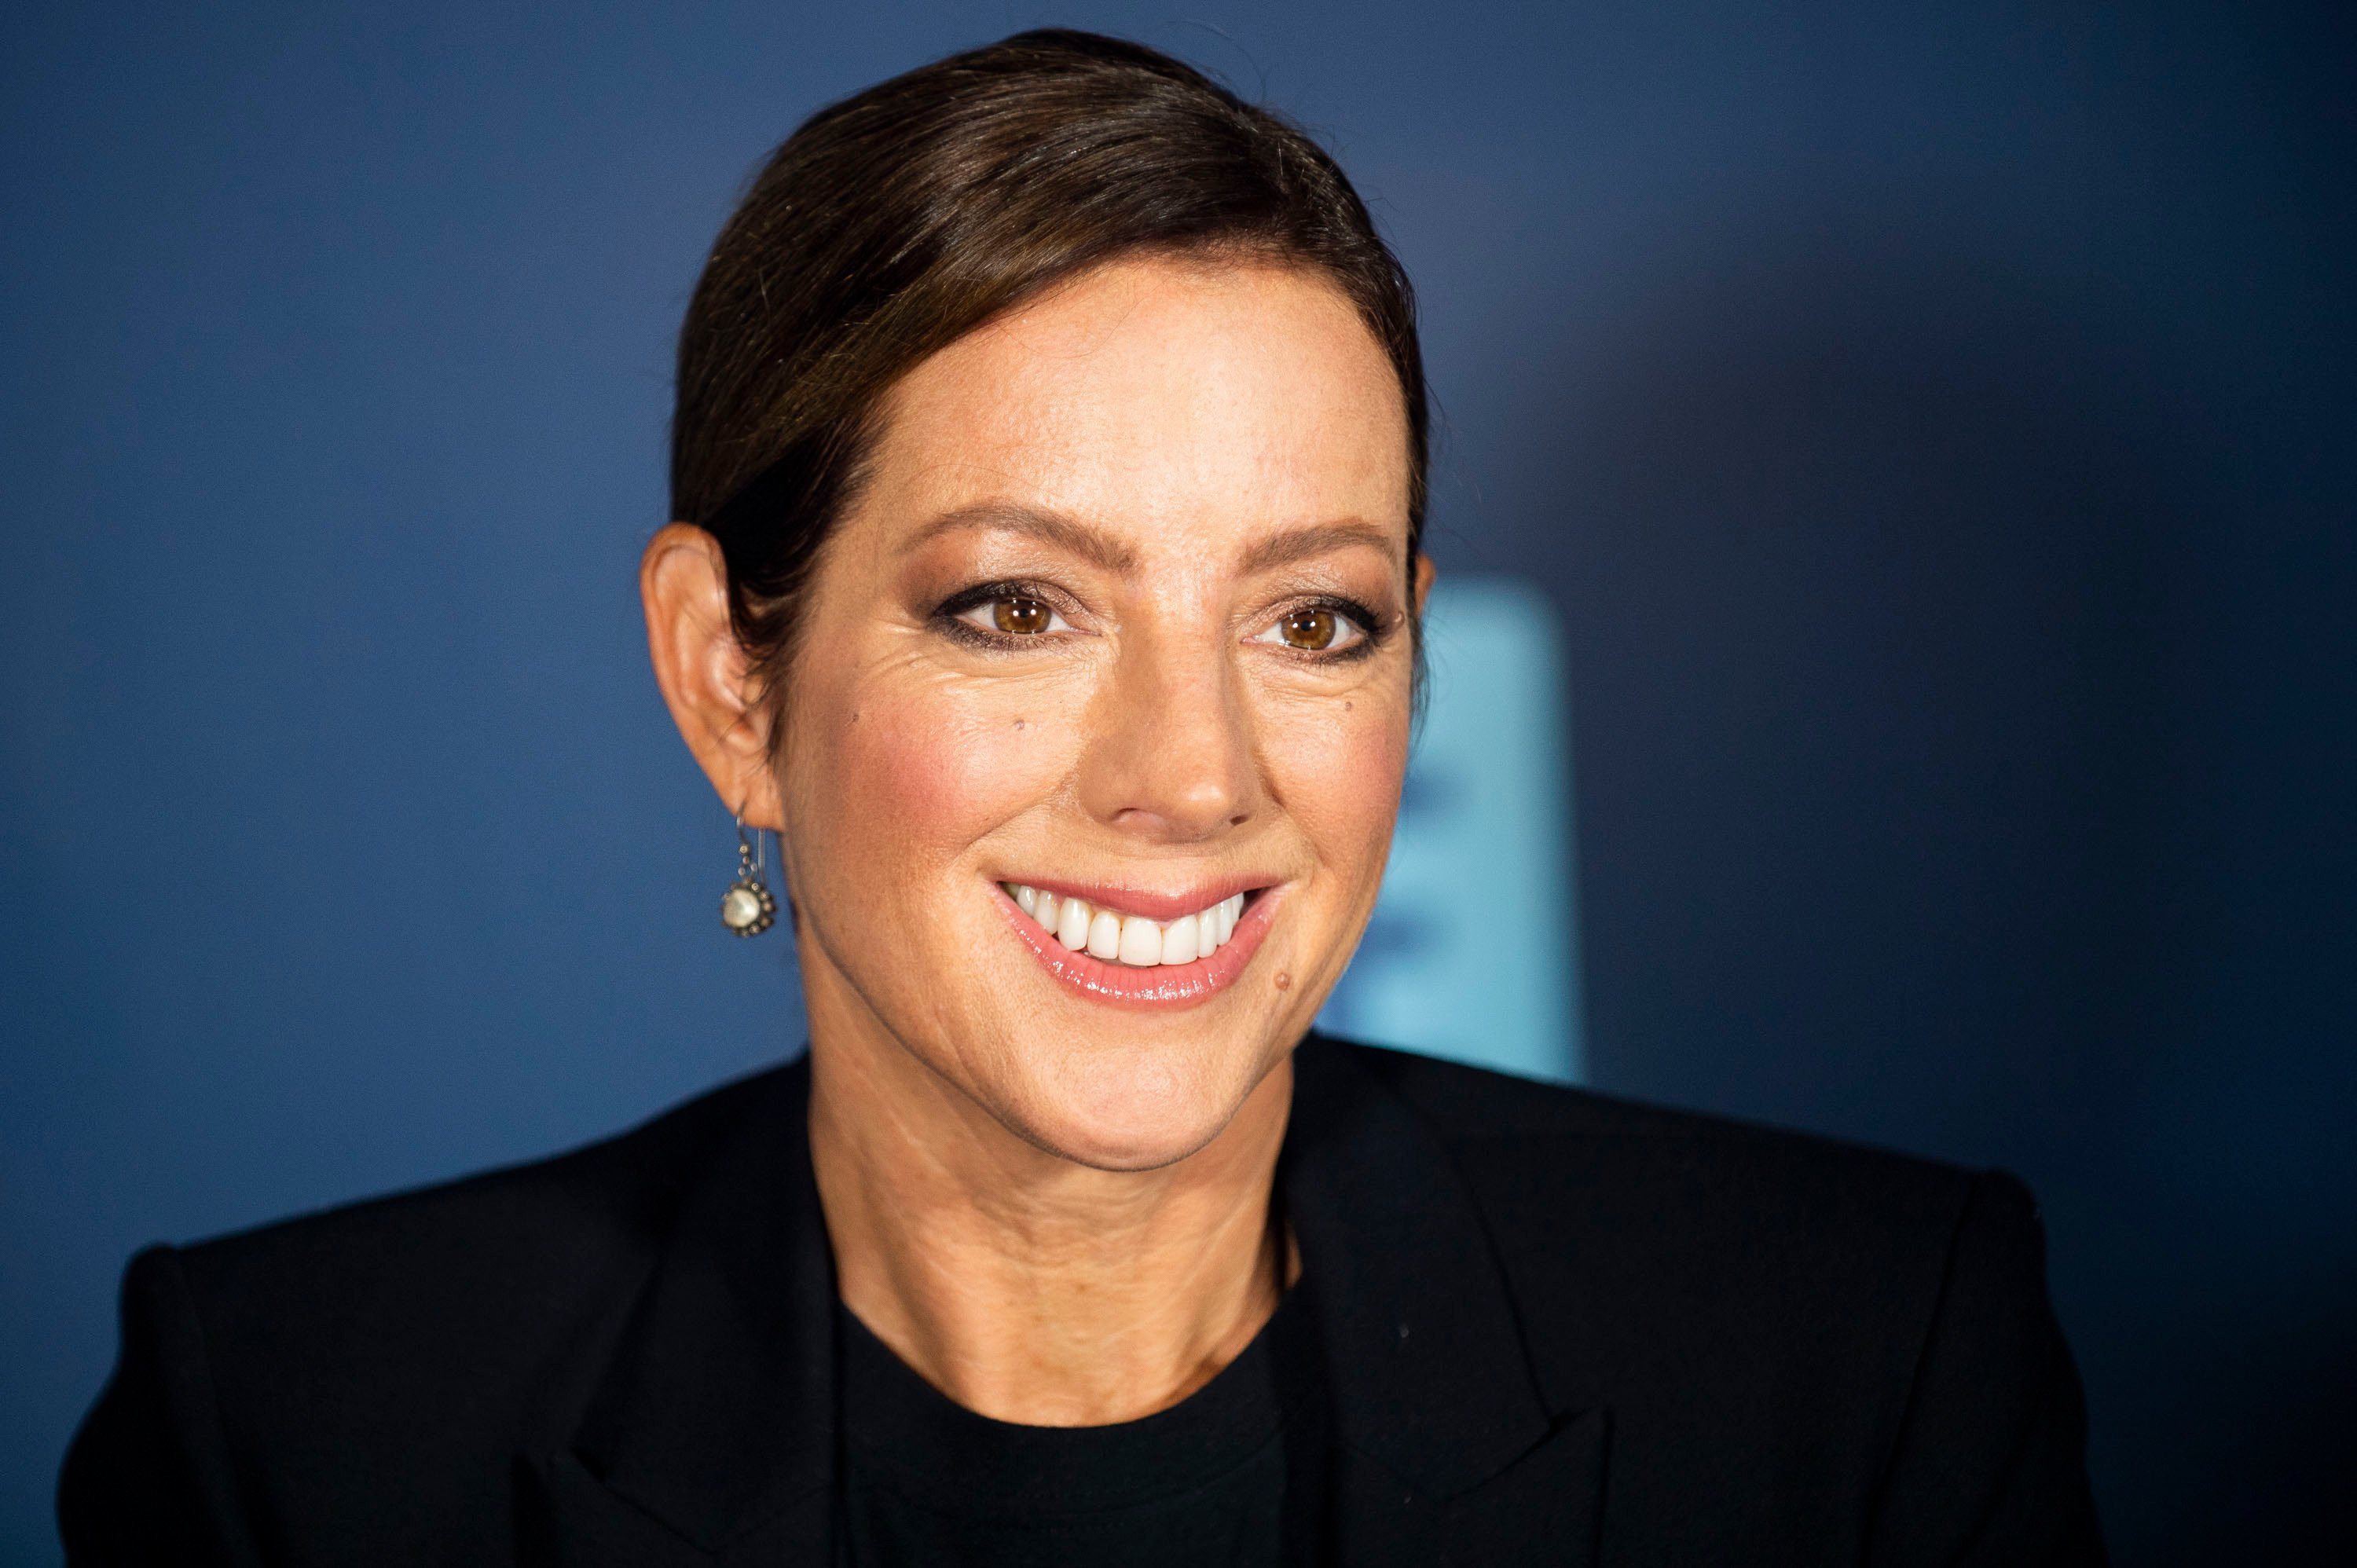 Mandatory Credit: Photo by Arthur Mola/Invision/AP/Shutterstock (10418465c) Sarah McLachlan attends WE Day Toronto at the Scotiabank Arena, in Toronto WE Day , Toronto, Canada - 19 Sep 2019